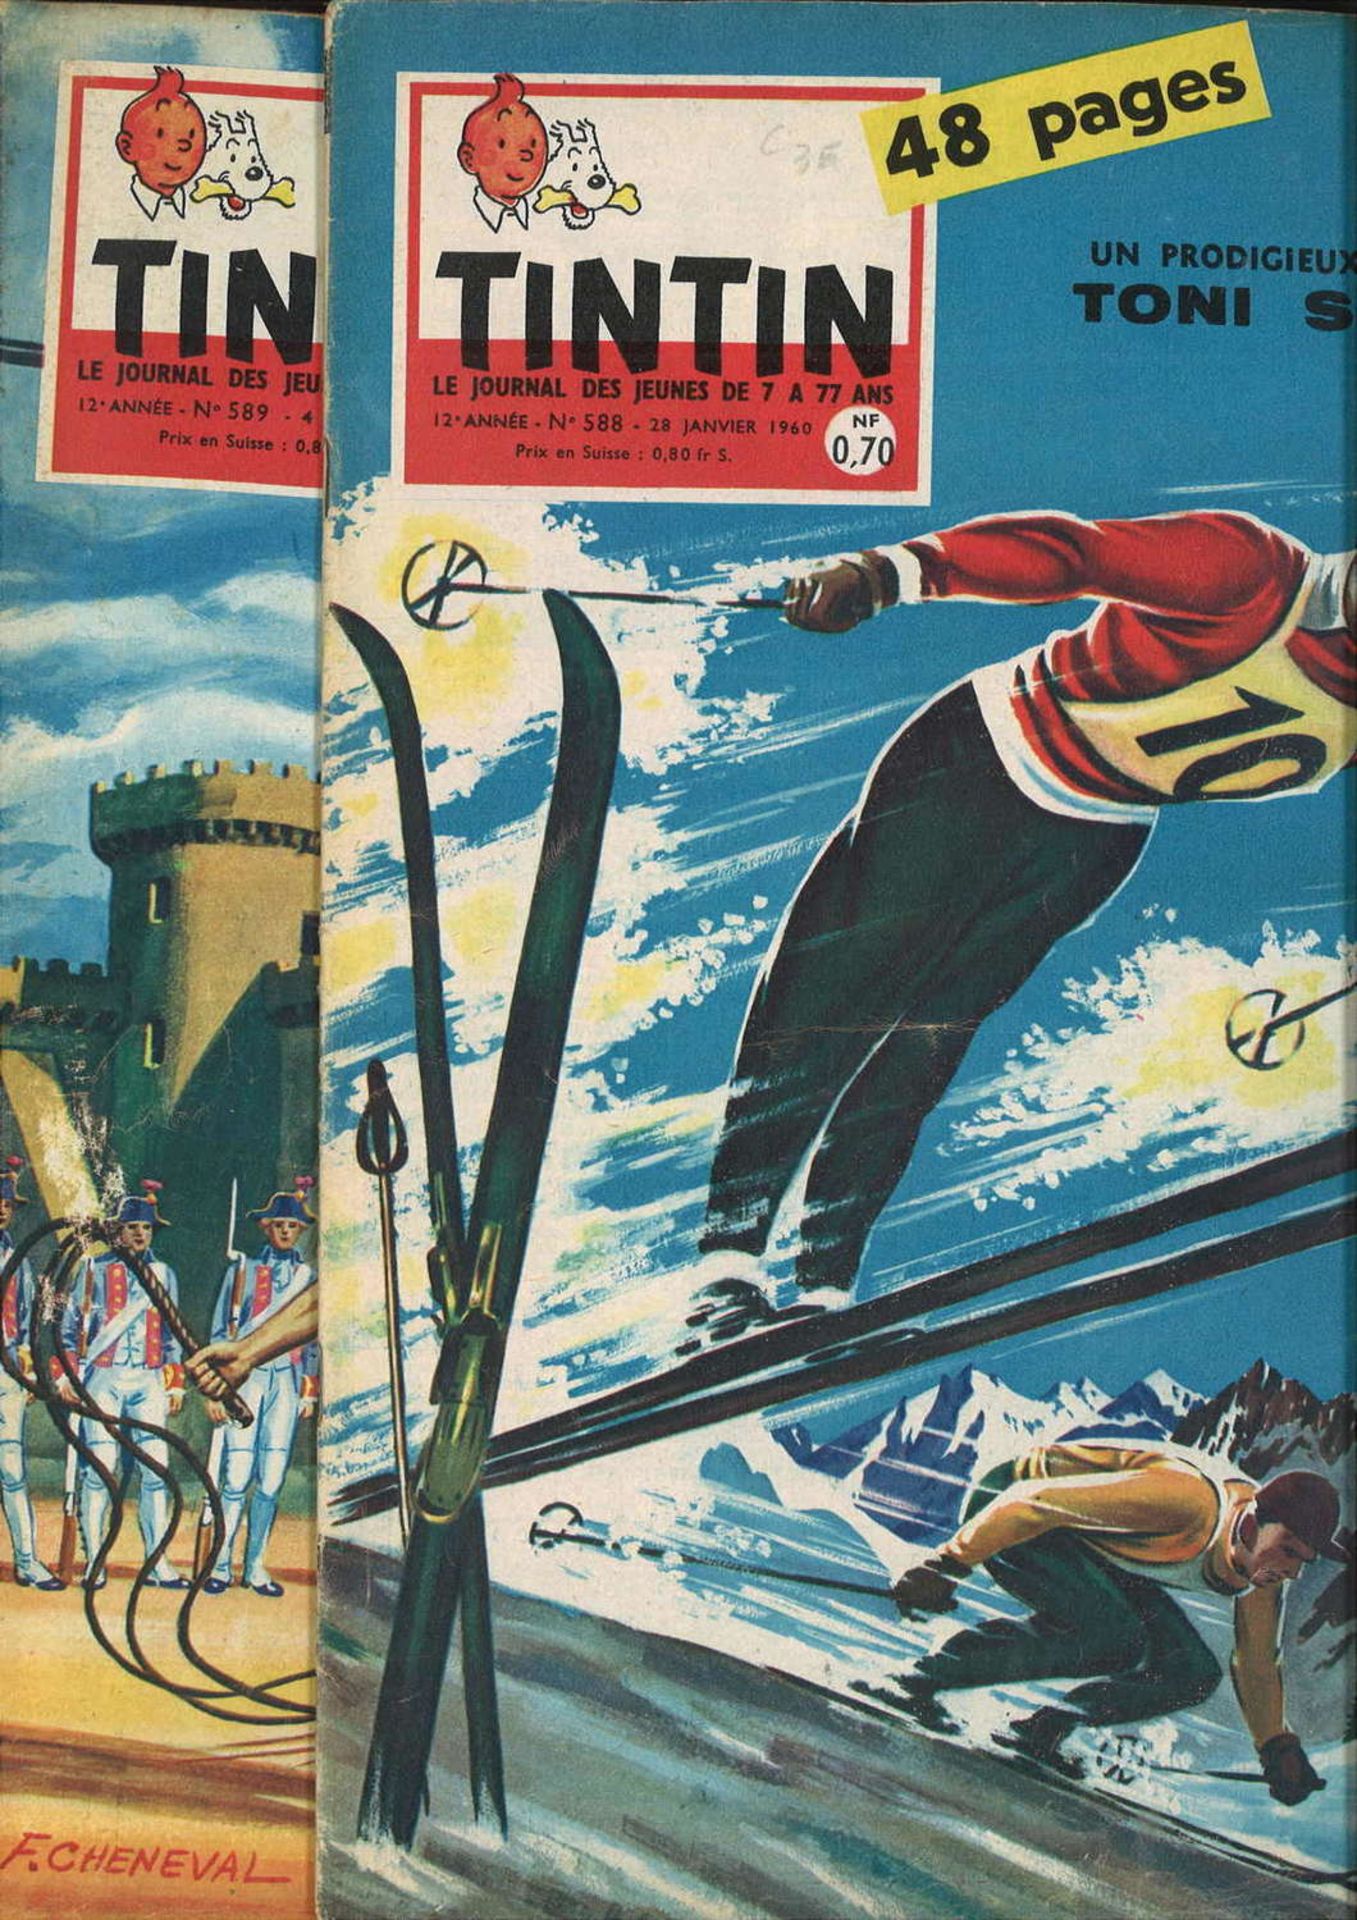 2 comic "Tintin - Chaque Jeudi", here No. 589 - 4 Février 1960 and No. 588 - 28 Janvier 19602